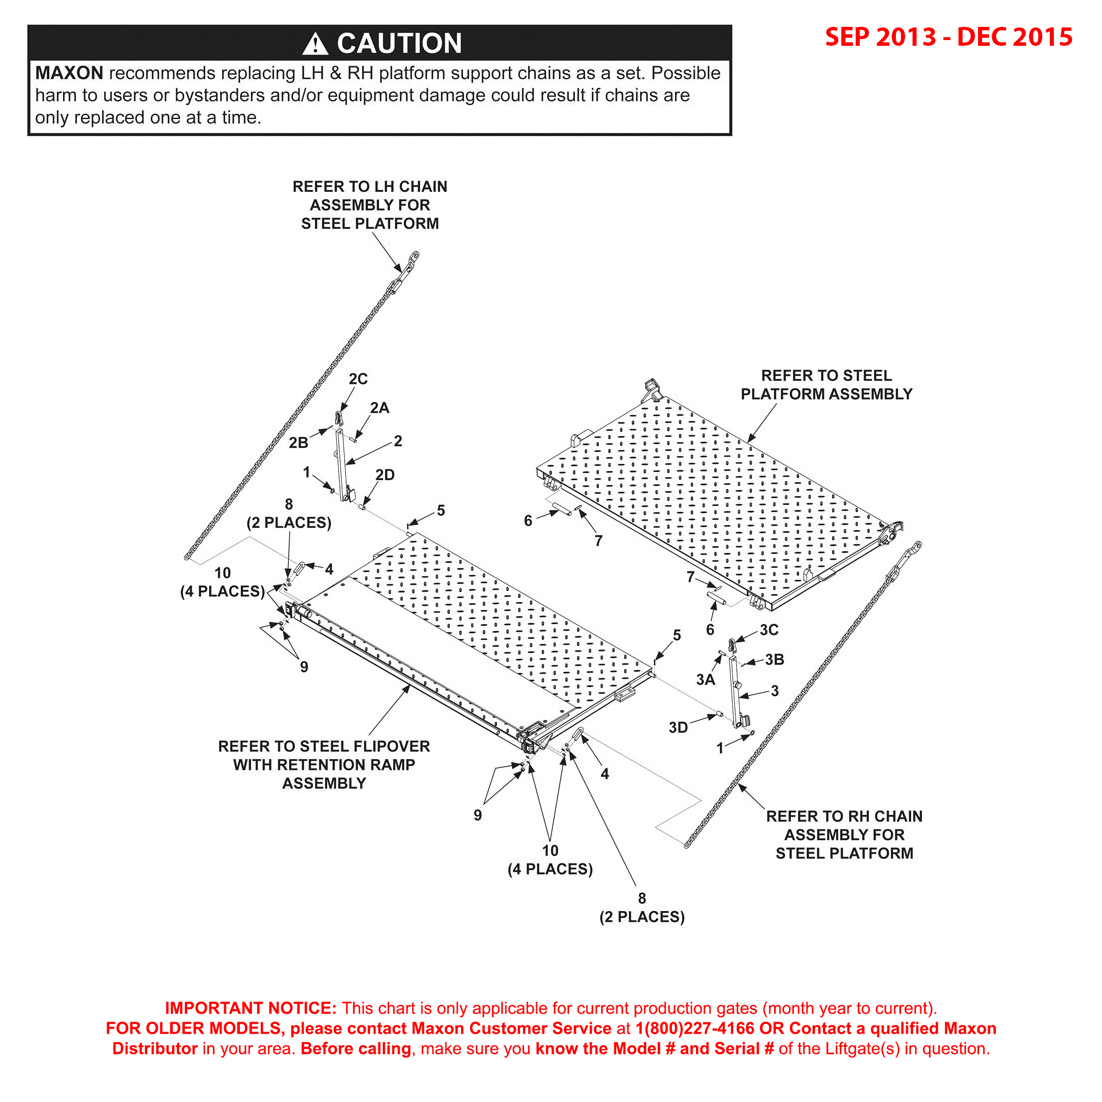 Maxon BMRA (Sep 2013 - Dec 2015) Steel Platform Flipover And Chain Assembly Diagram (1 OF 3)